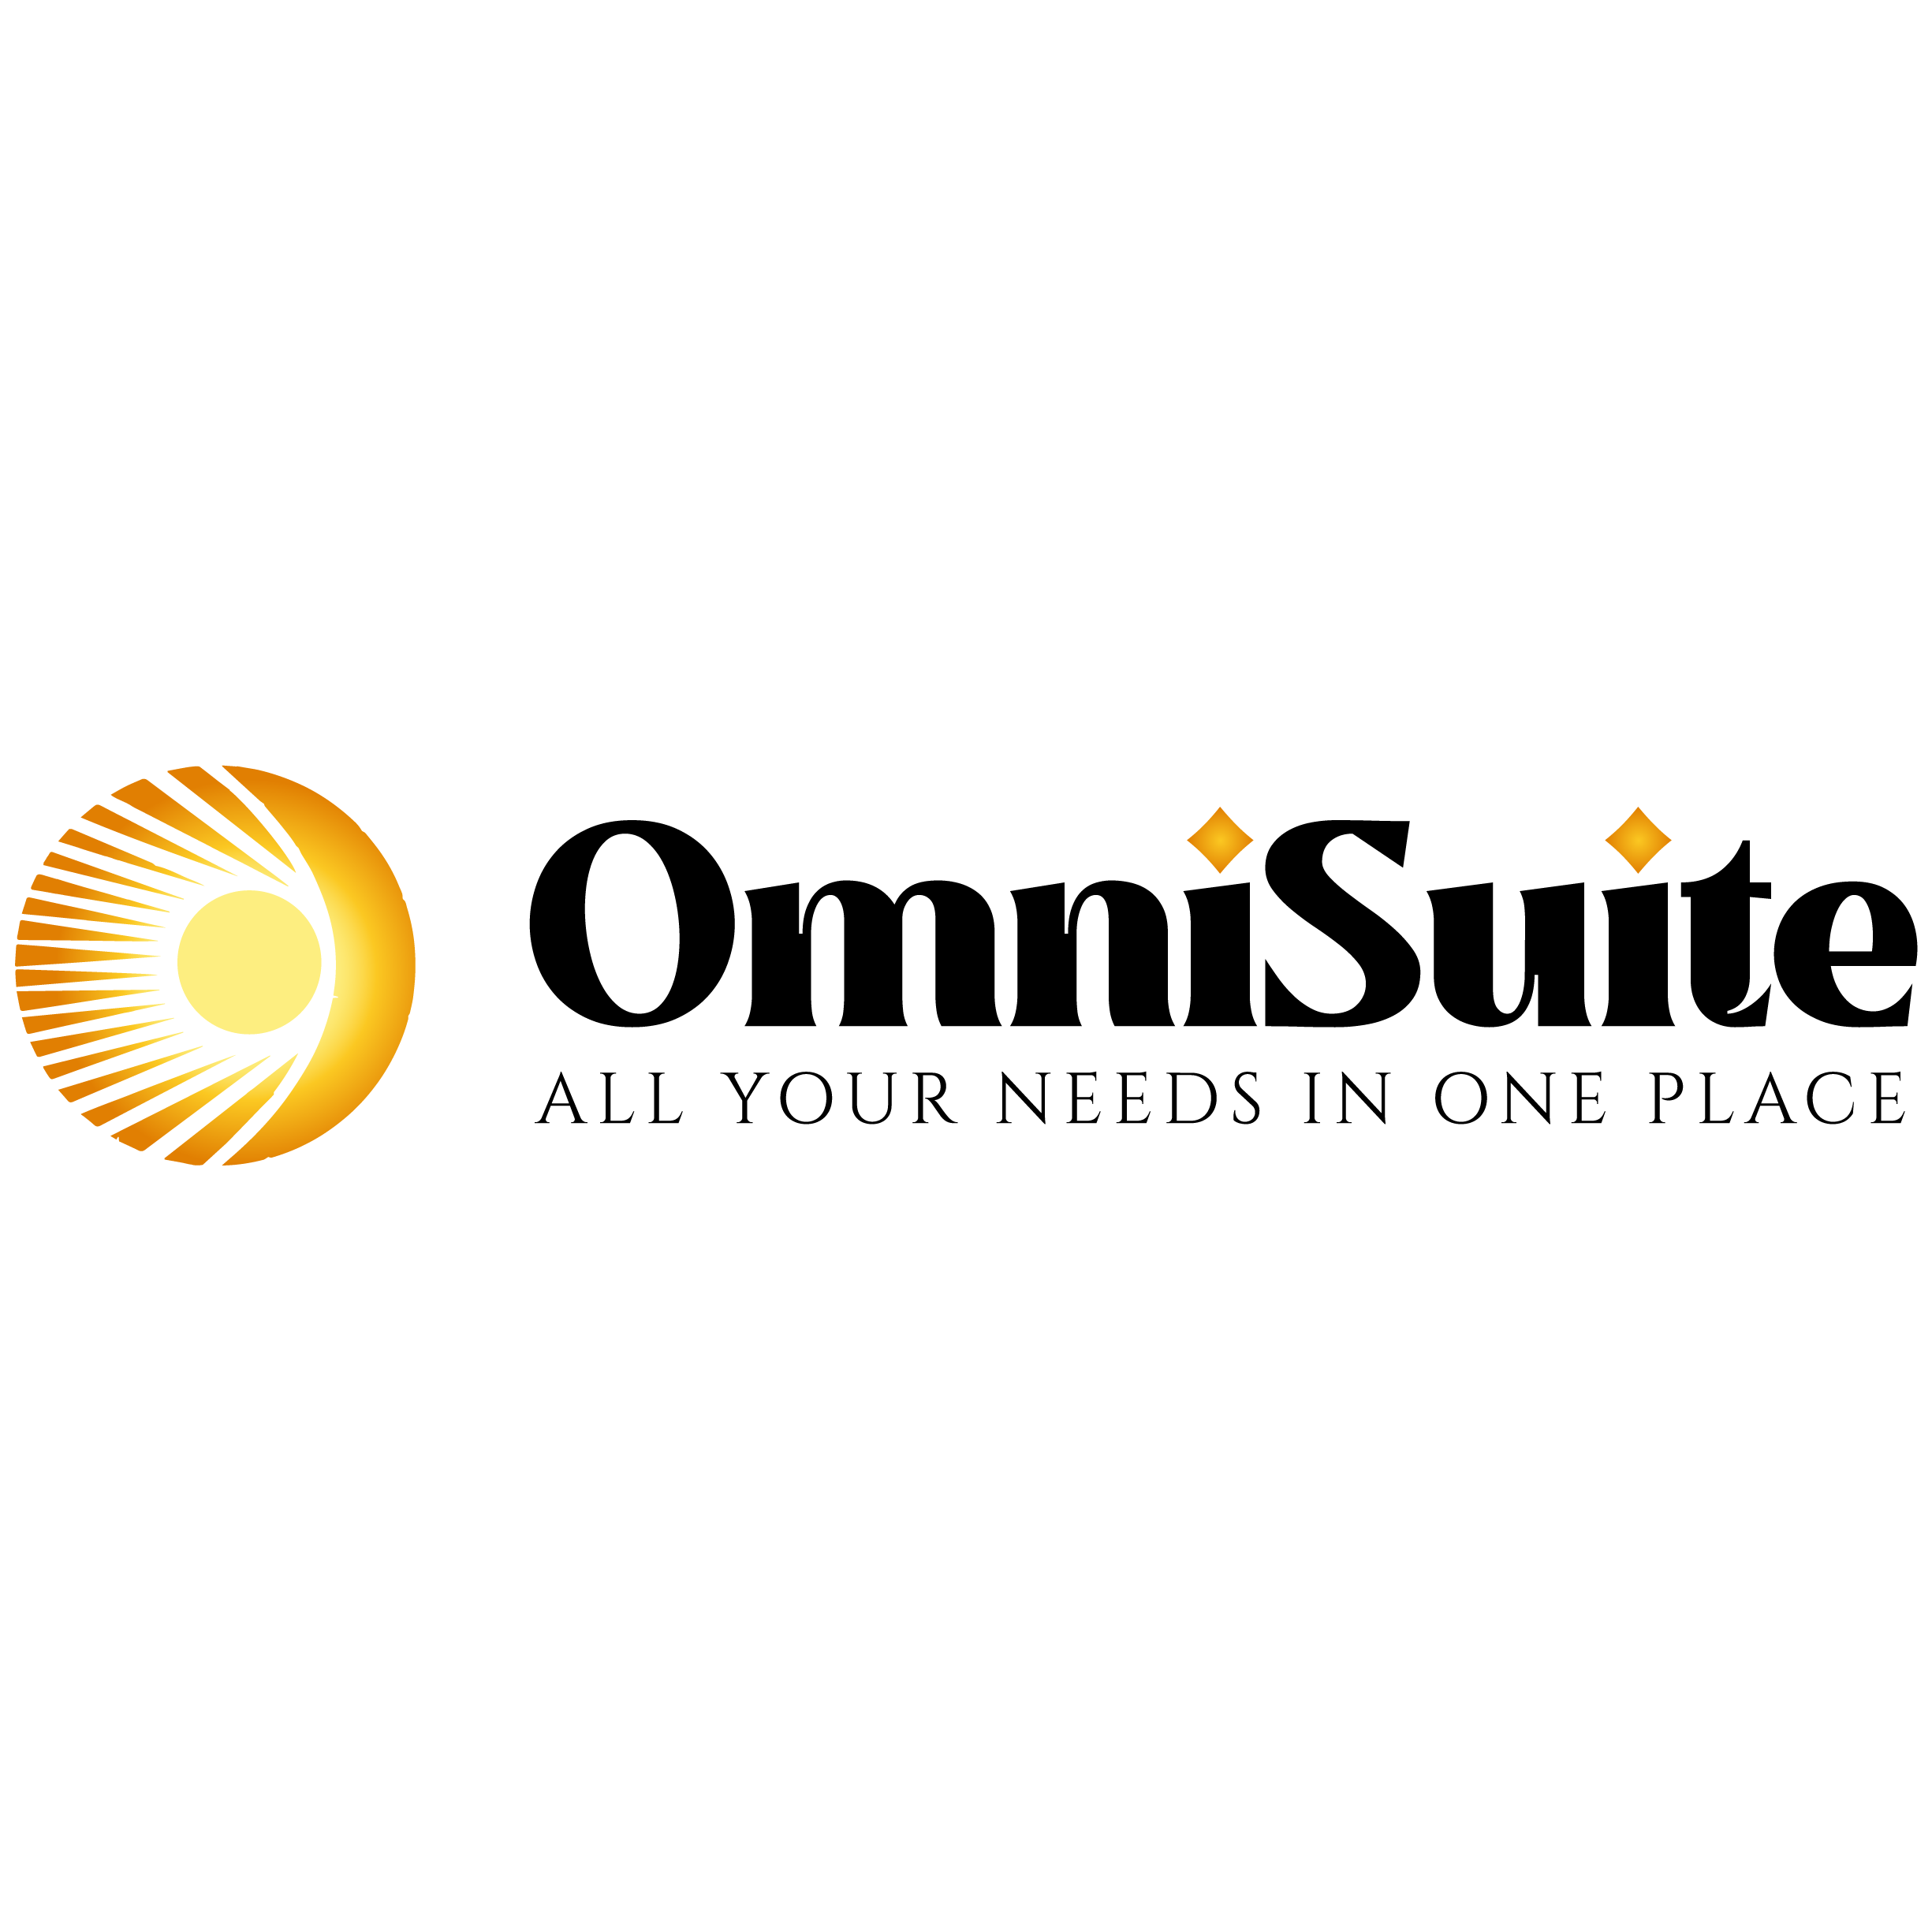 OmniSuite: All-in-One Marketing, Sales and Automation Software - Chicago, IL 60628 - (773)747-3066 | ShowMeLocal.com